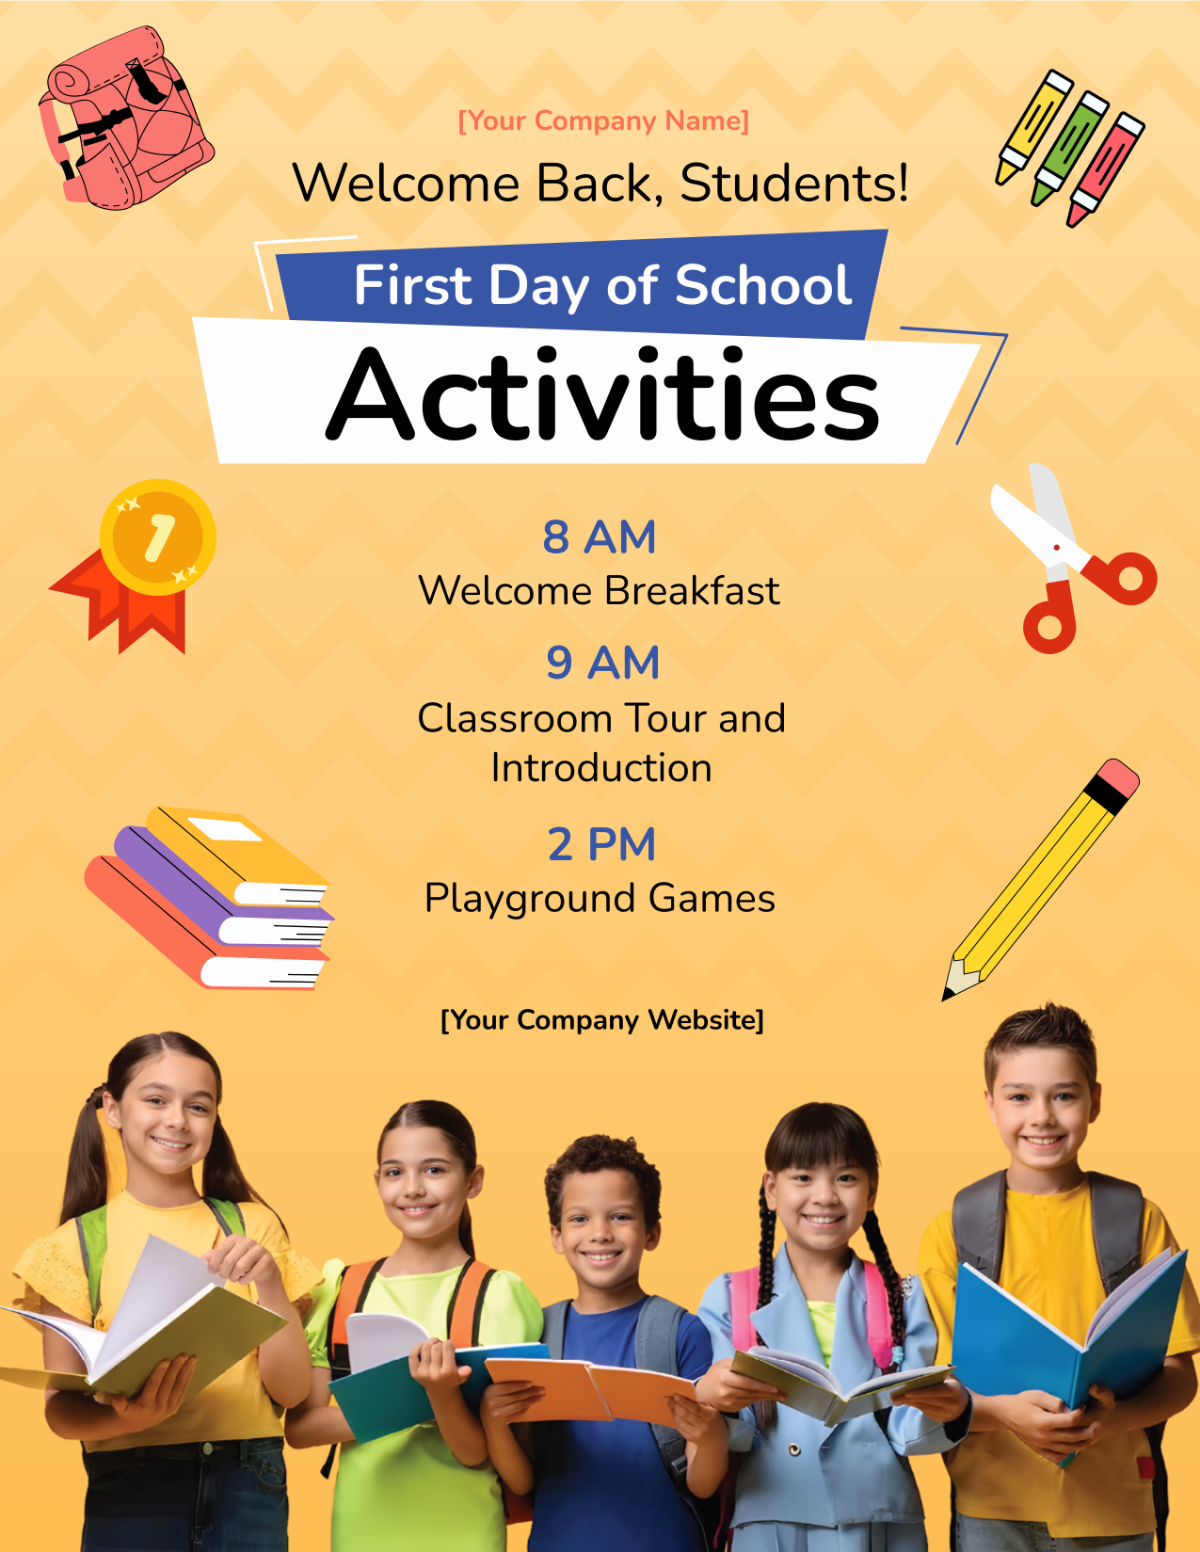 Back to School Activities for Elementary Students